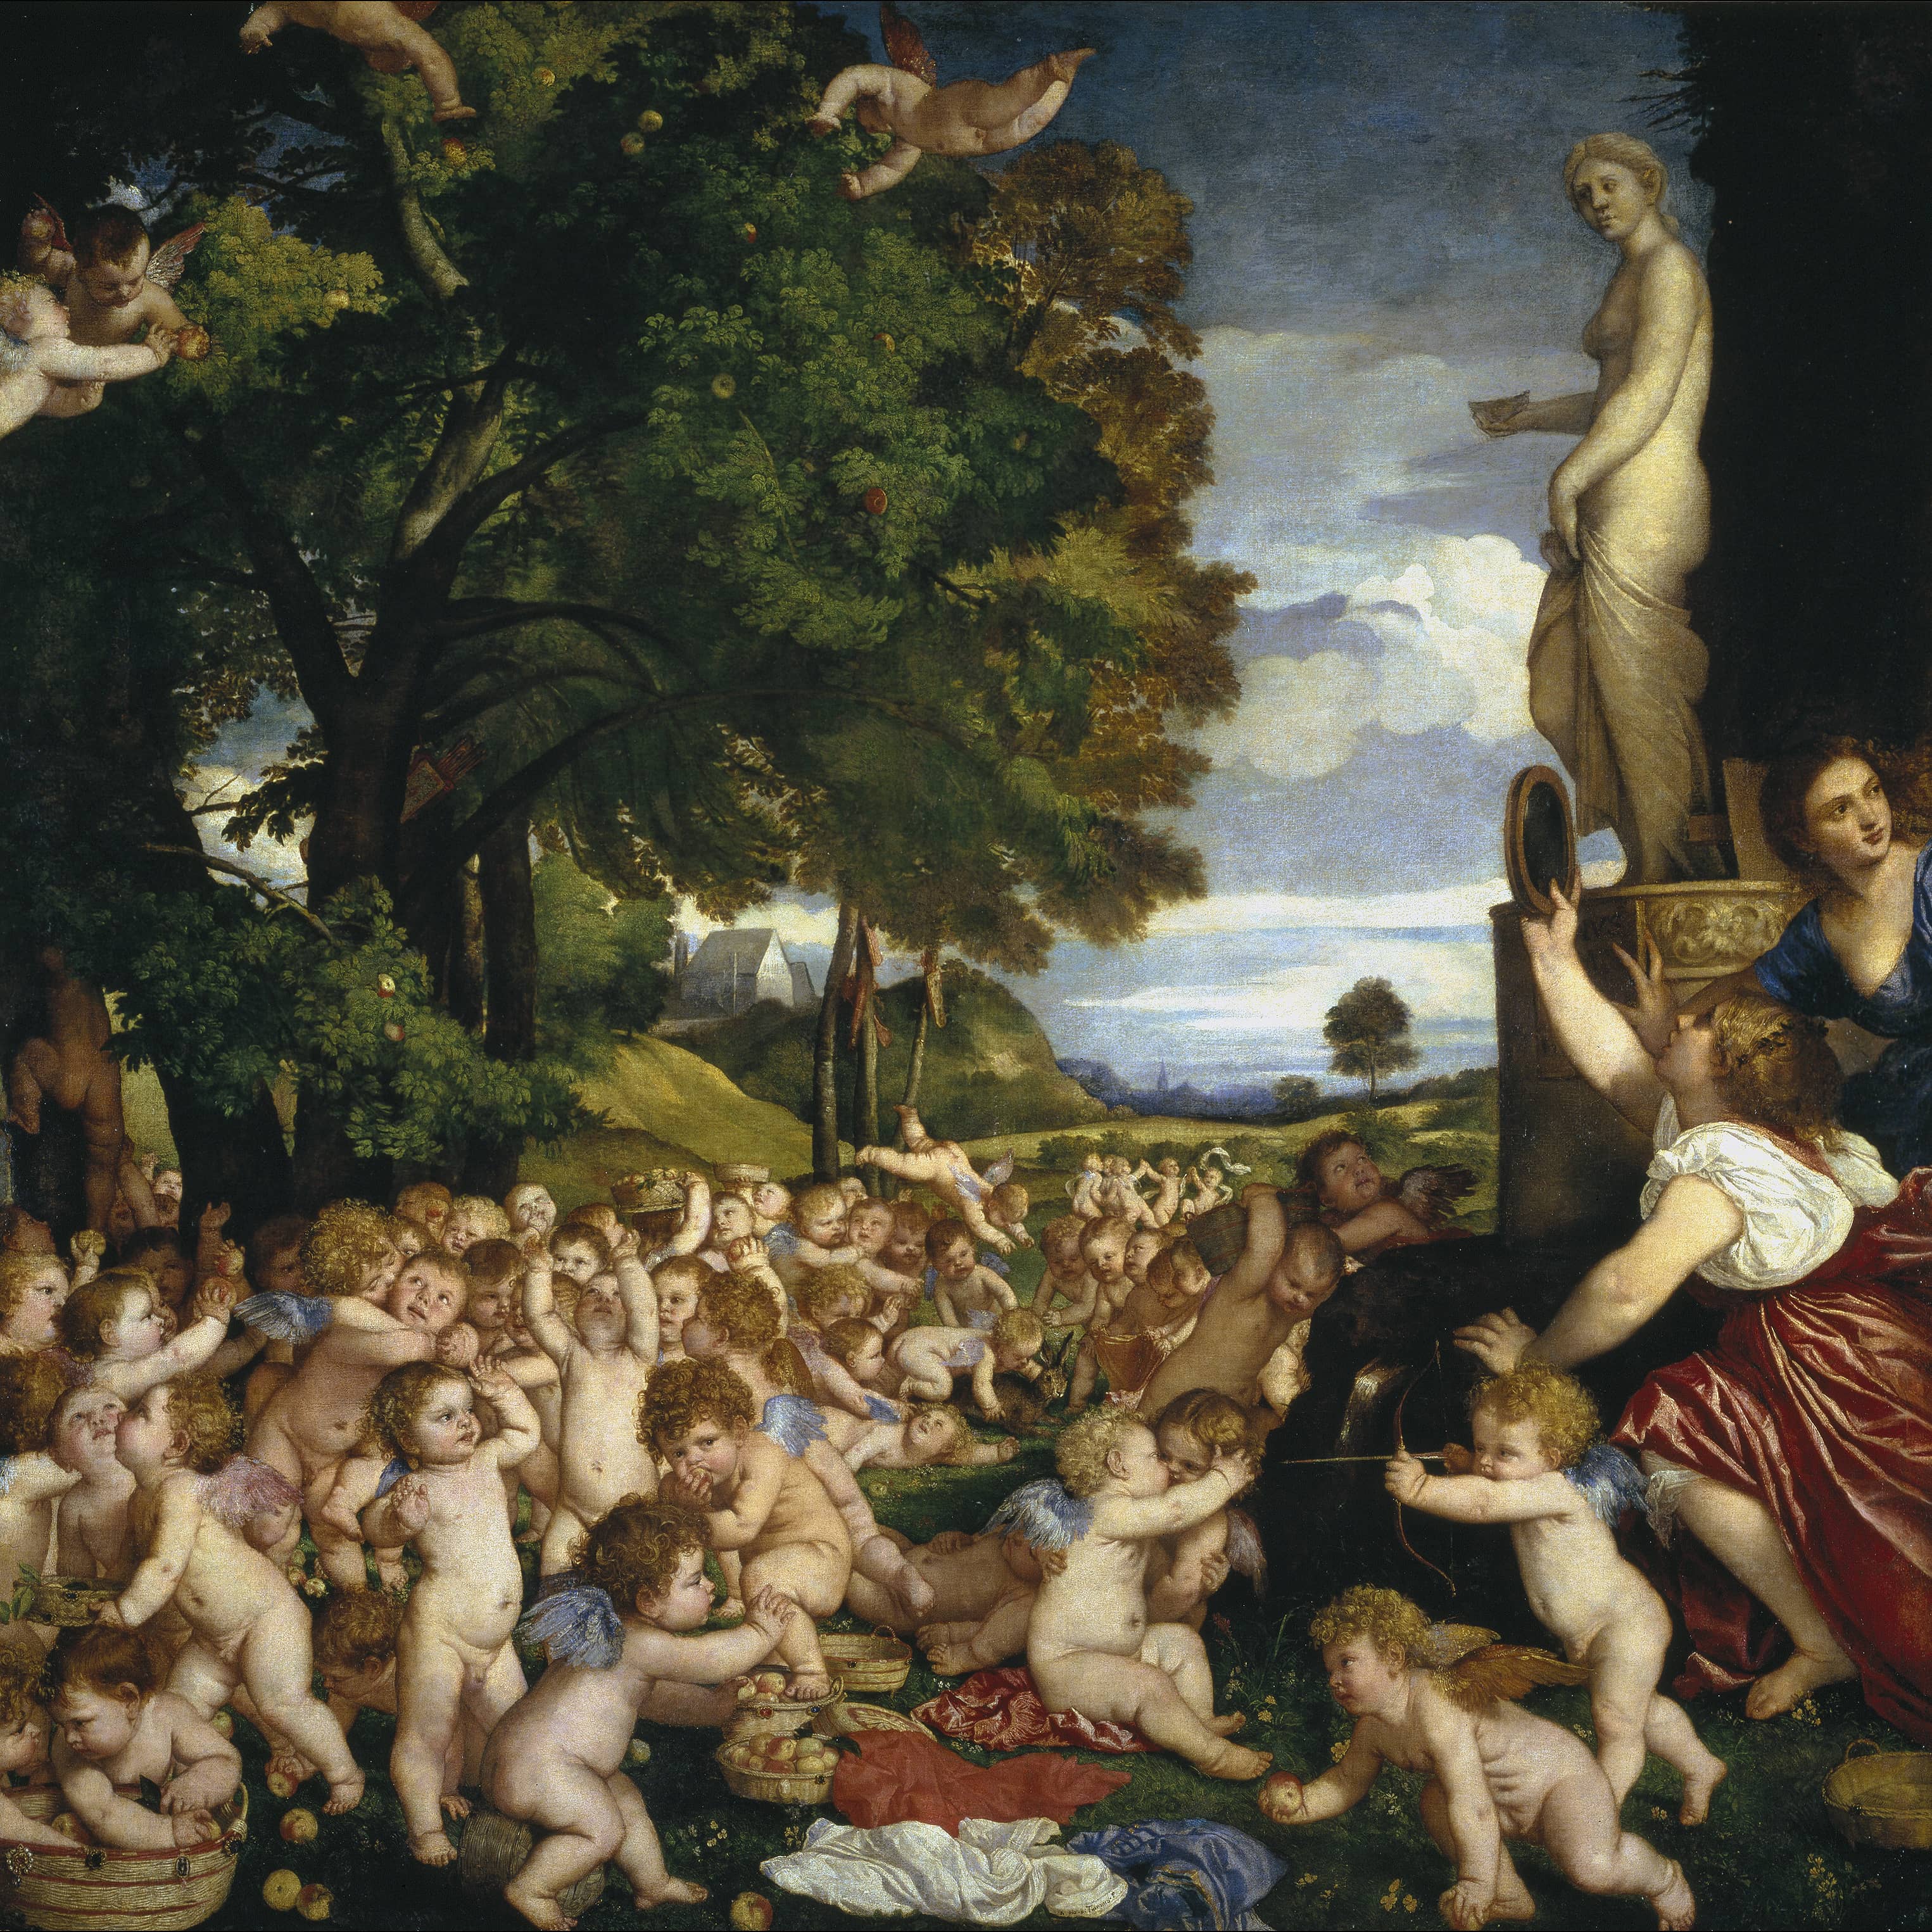 The Worship of Venus, 1516 by Titian